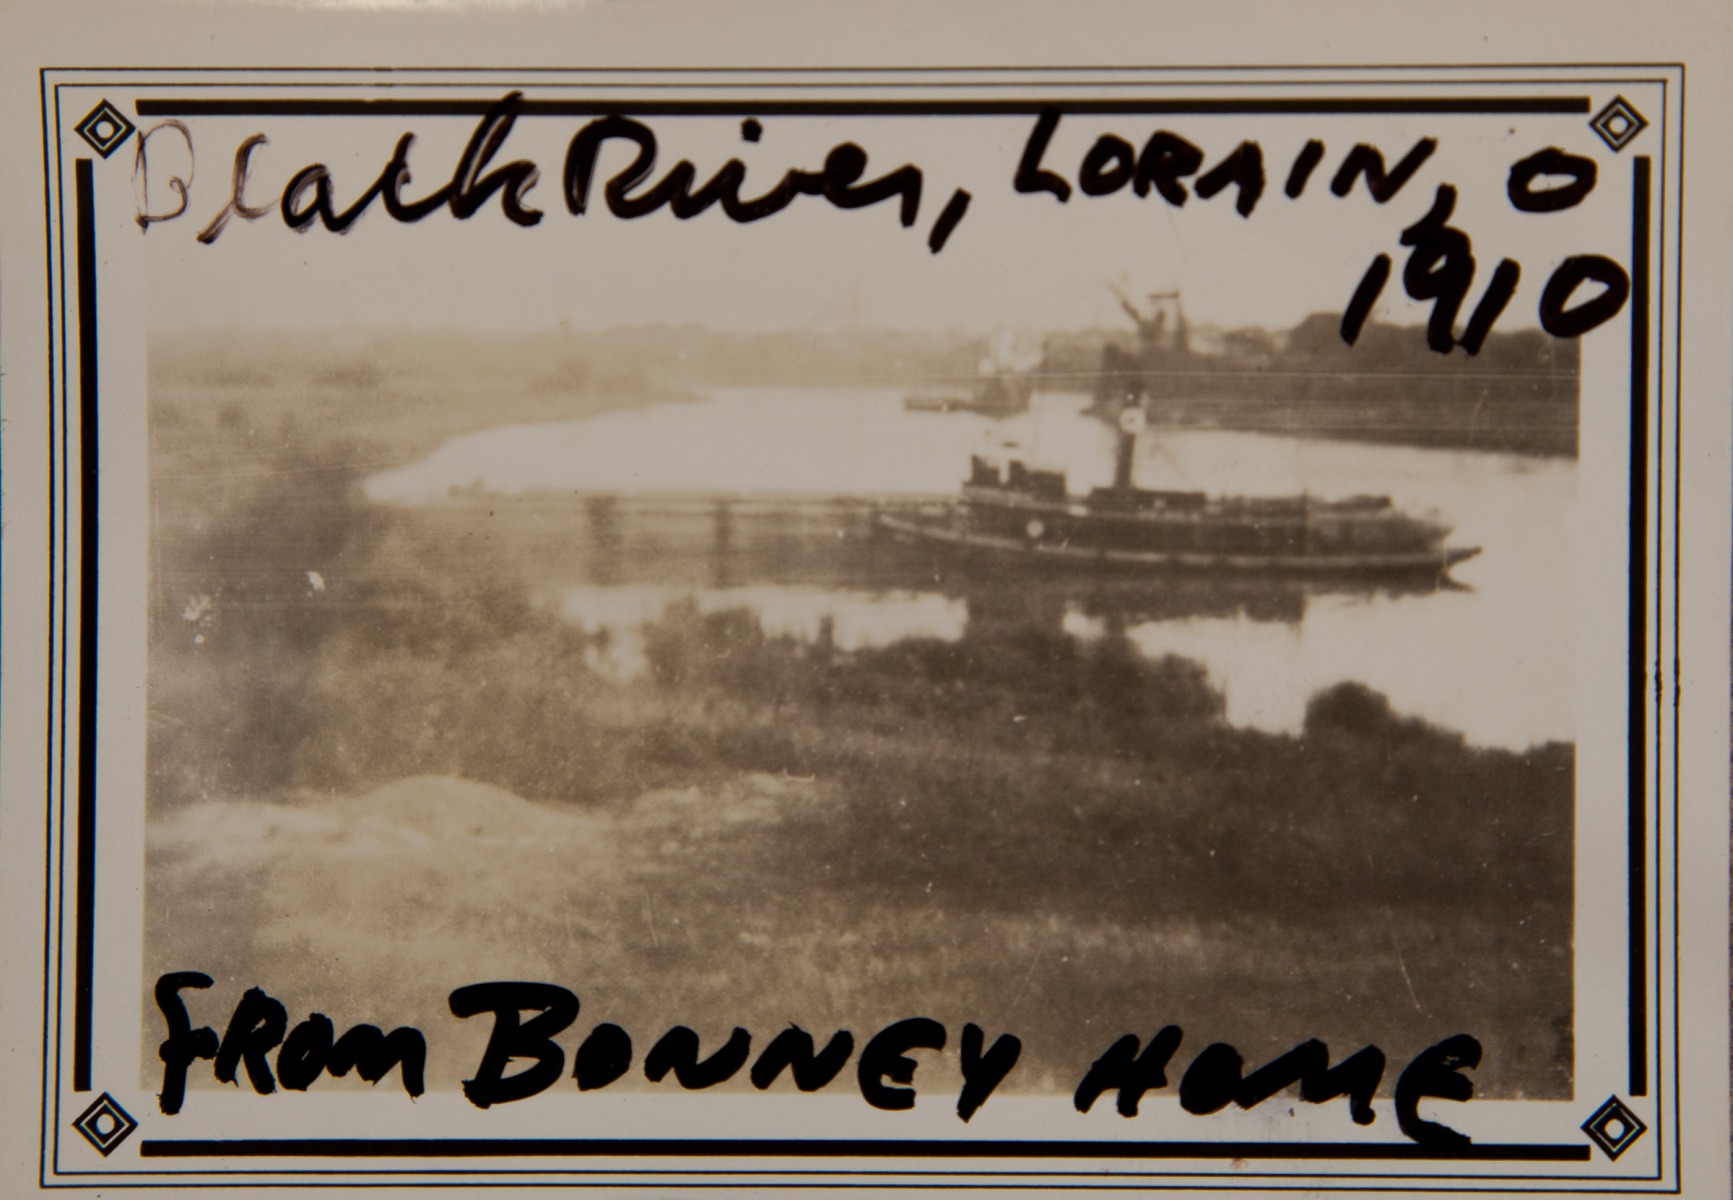 1910, "Black River, Lorain, O, 1910, from BONNEY Home"